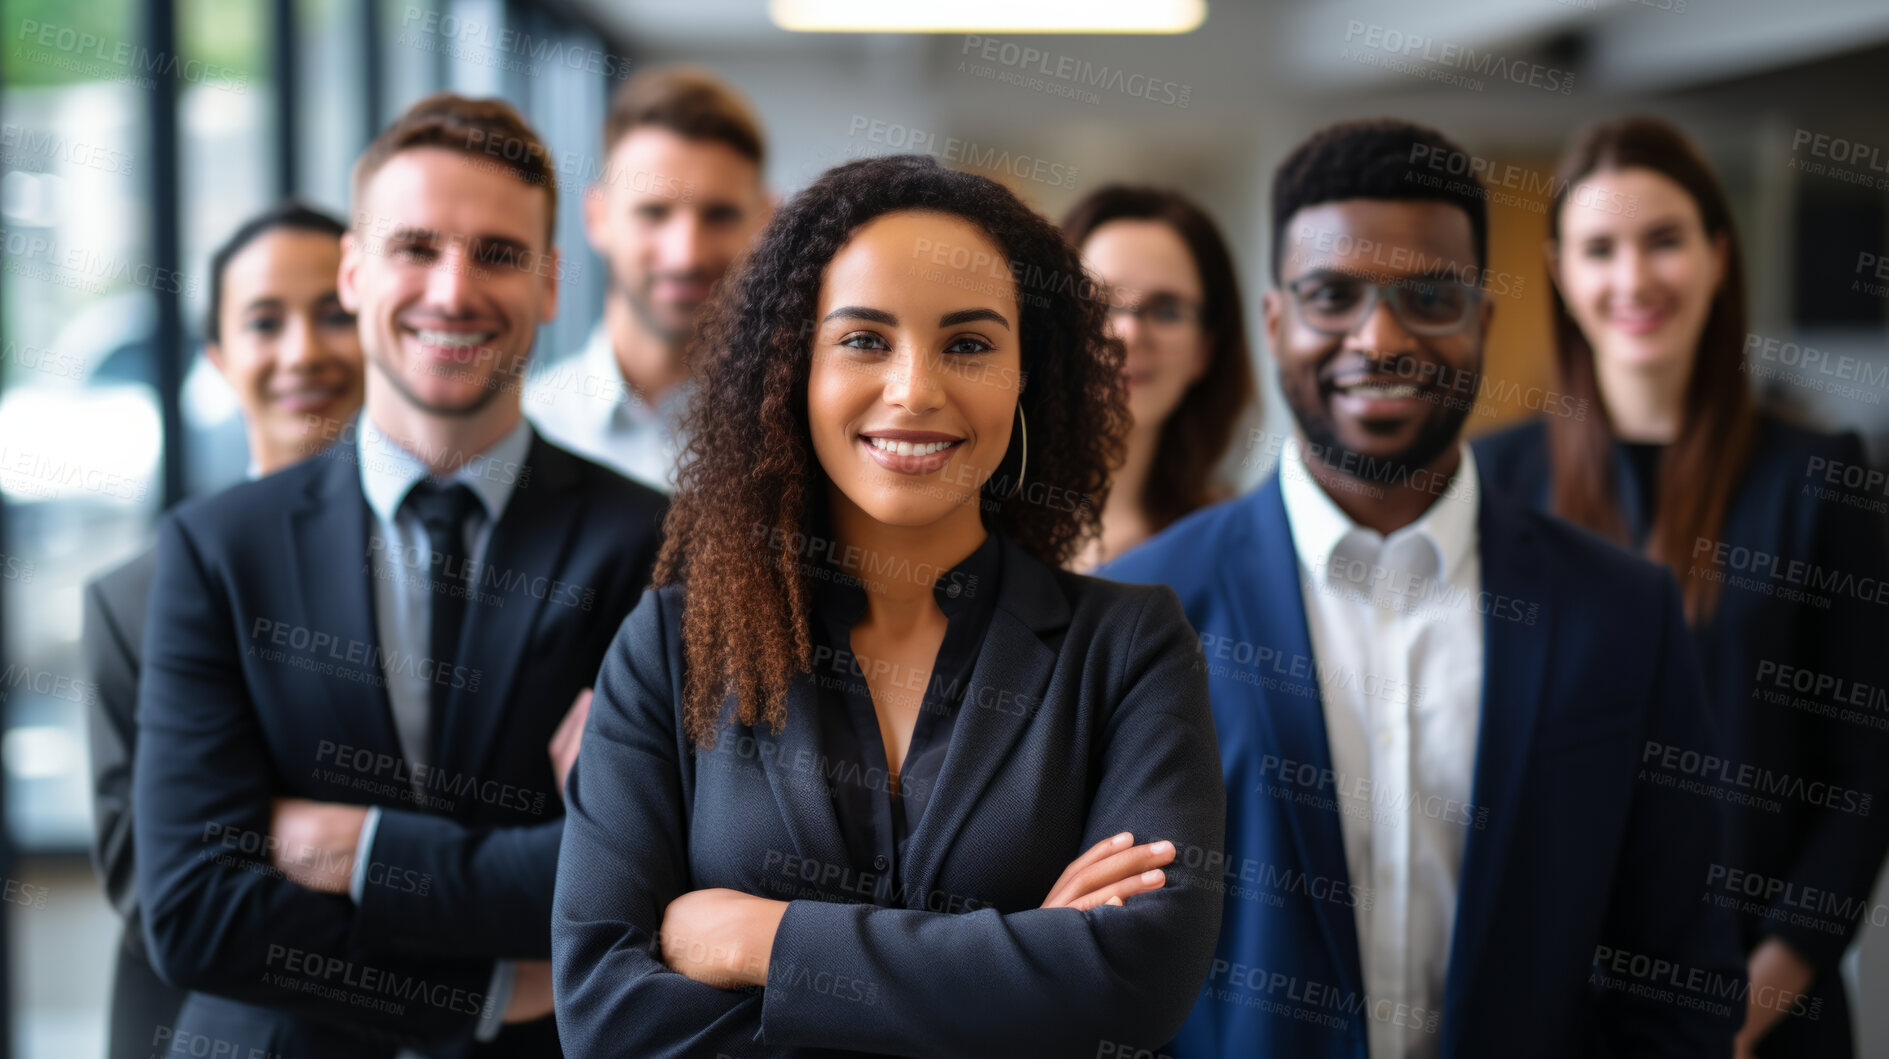 Buy stock photo Portrait of a group of business people professionals smiling. Teamwork and colleagues